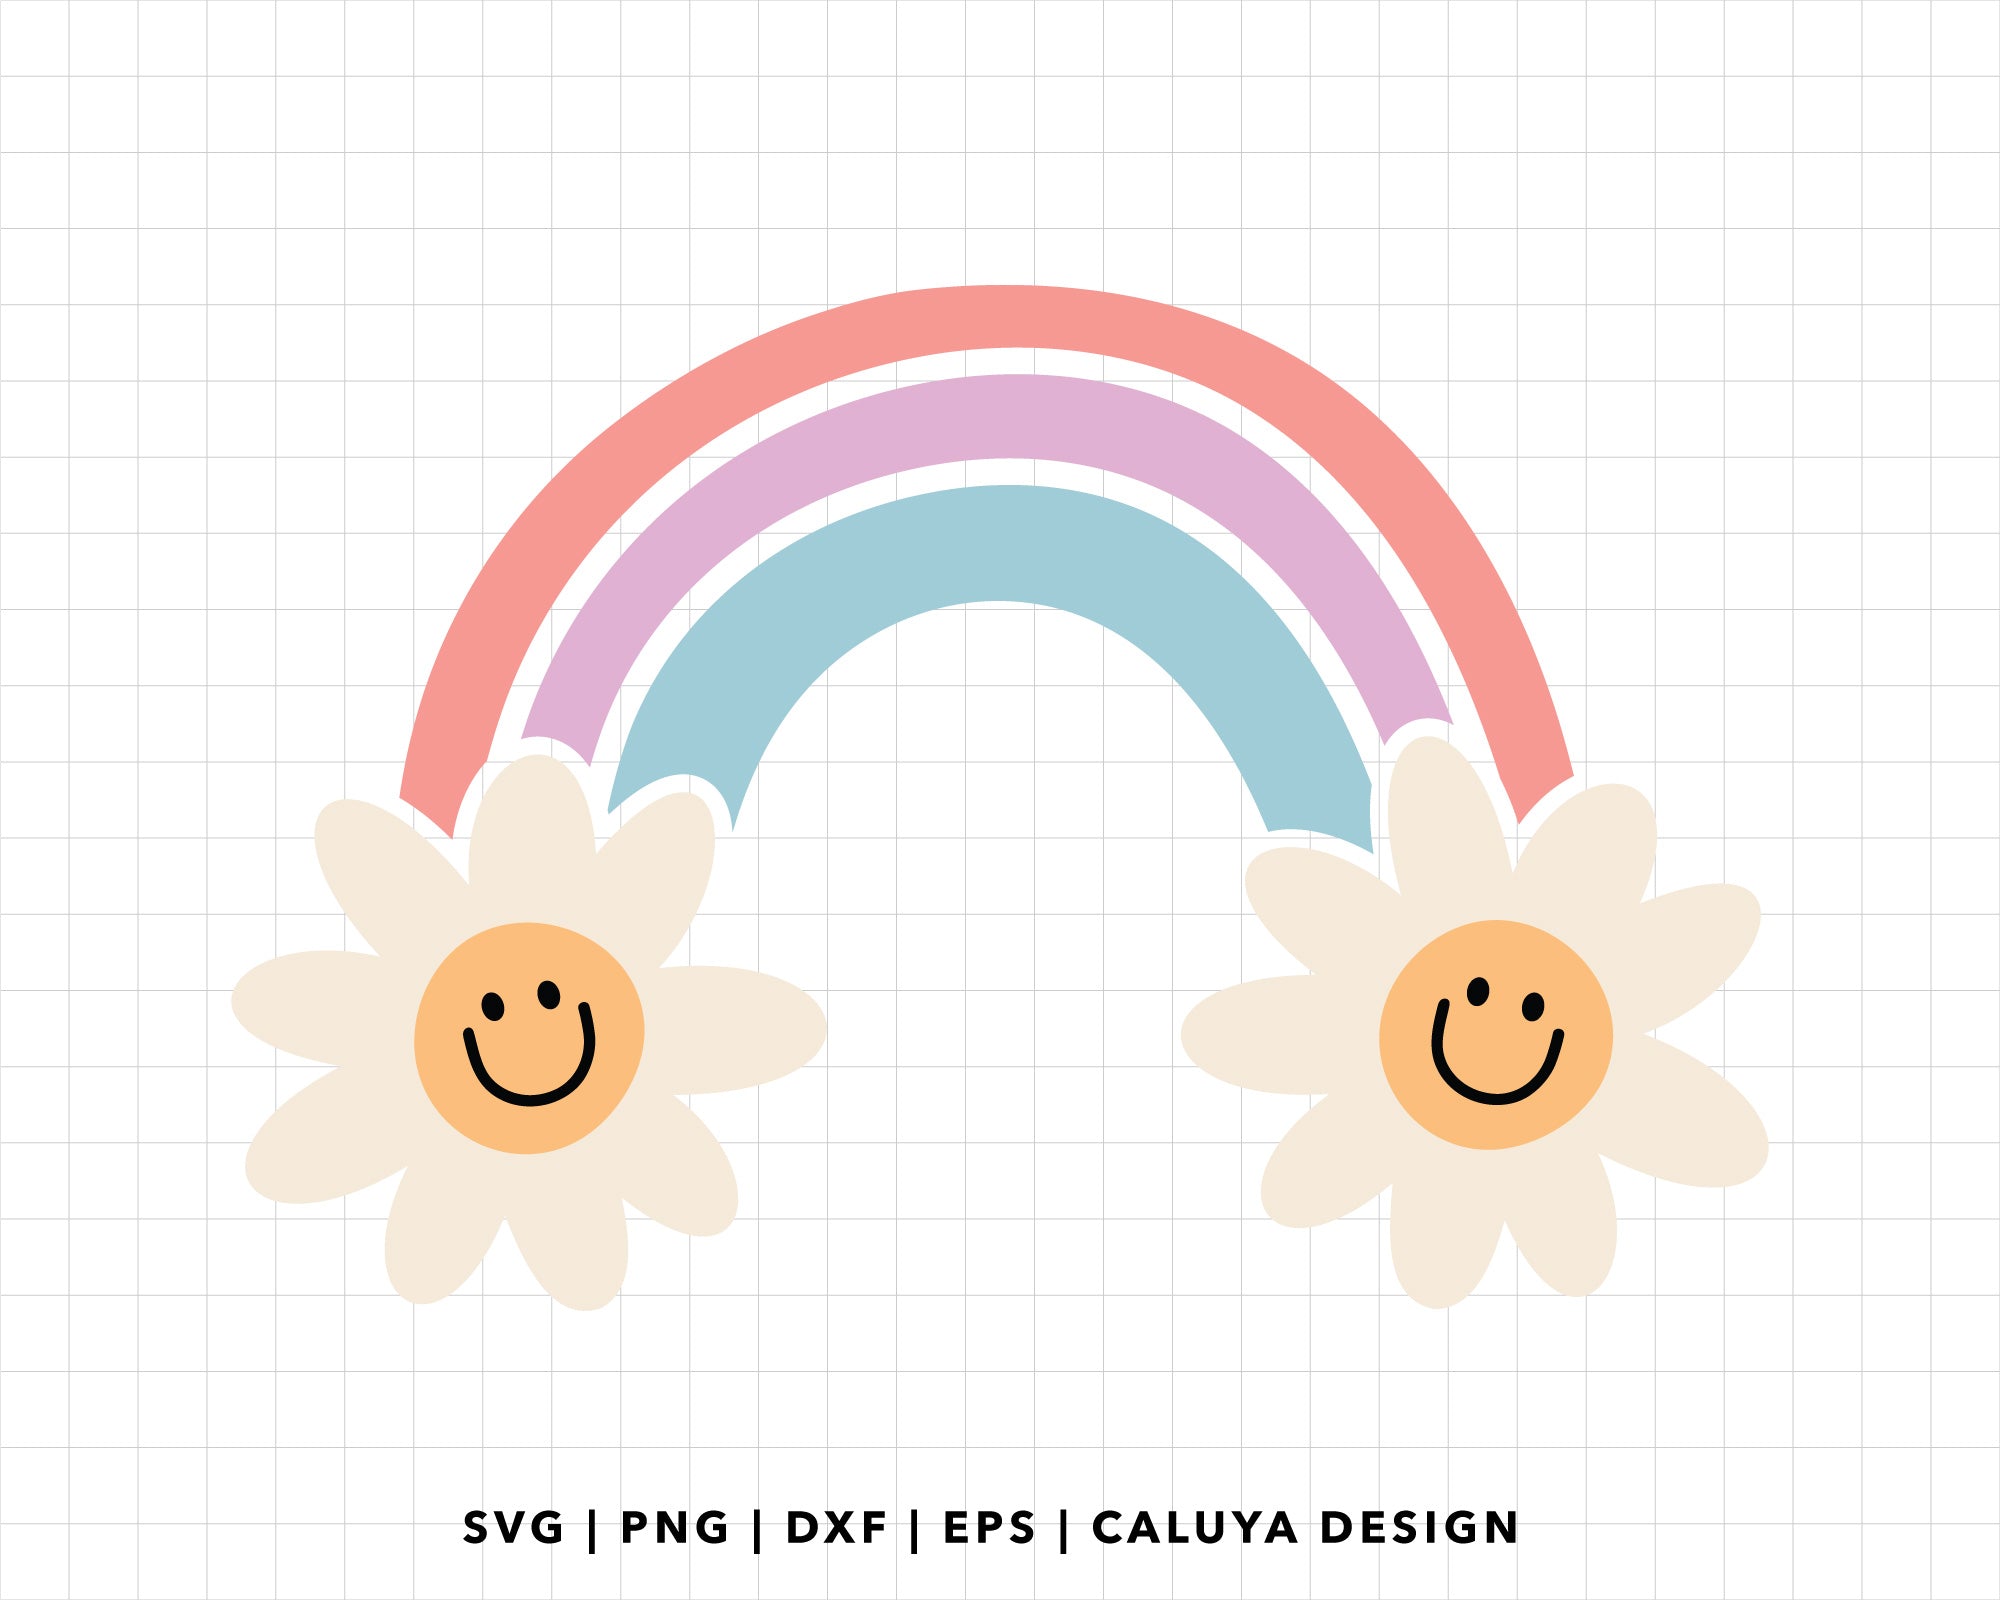 Pink from Rainbow Friends SVG, Funny SVG, PNG DXF EPS Digital File.